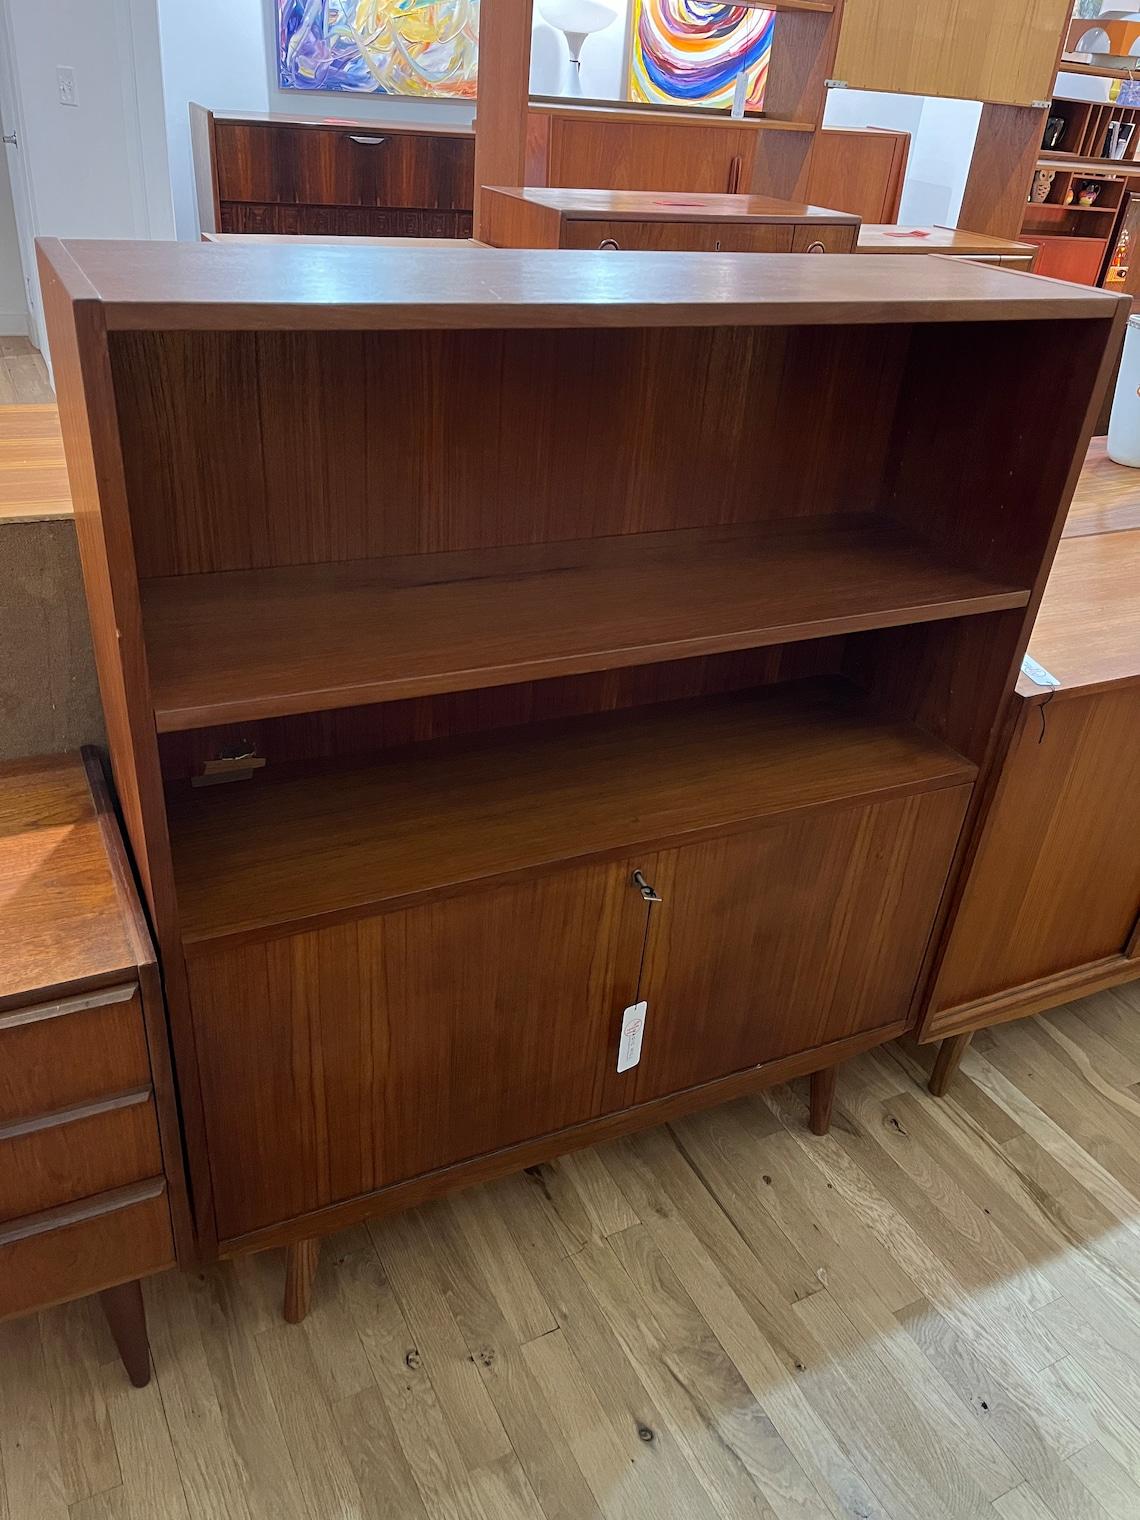 Danish Mid-Century Bookcase with Storage in the bottom